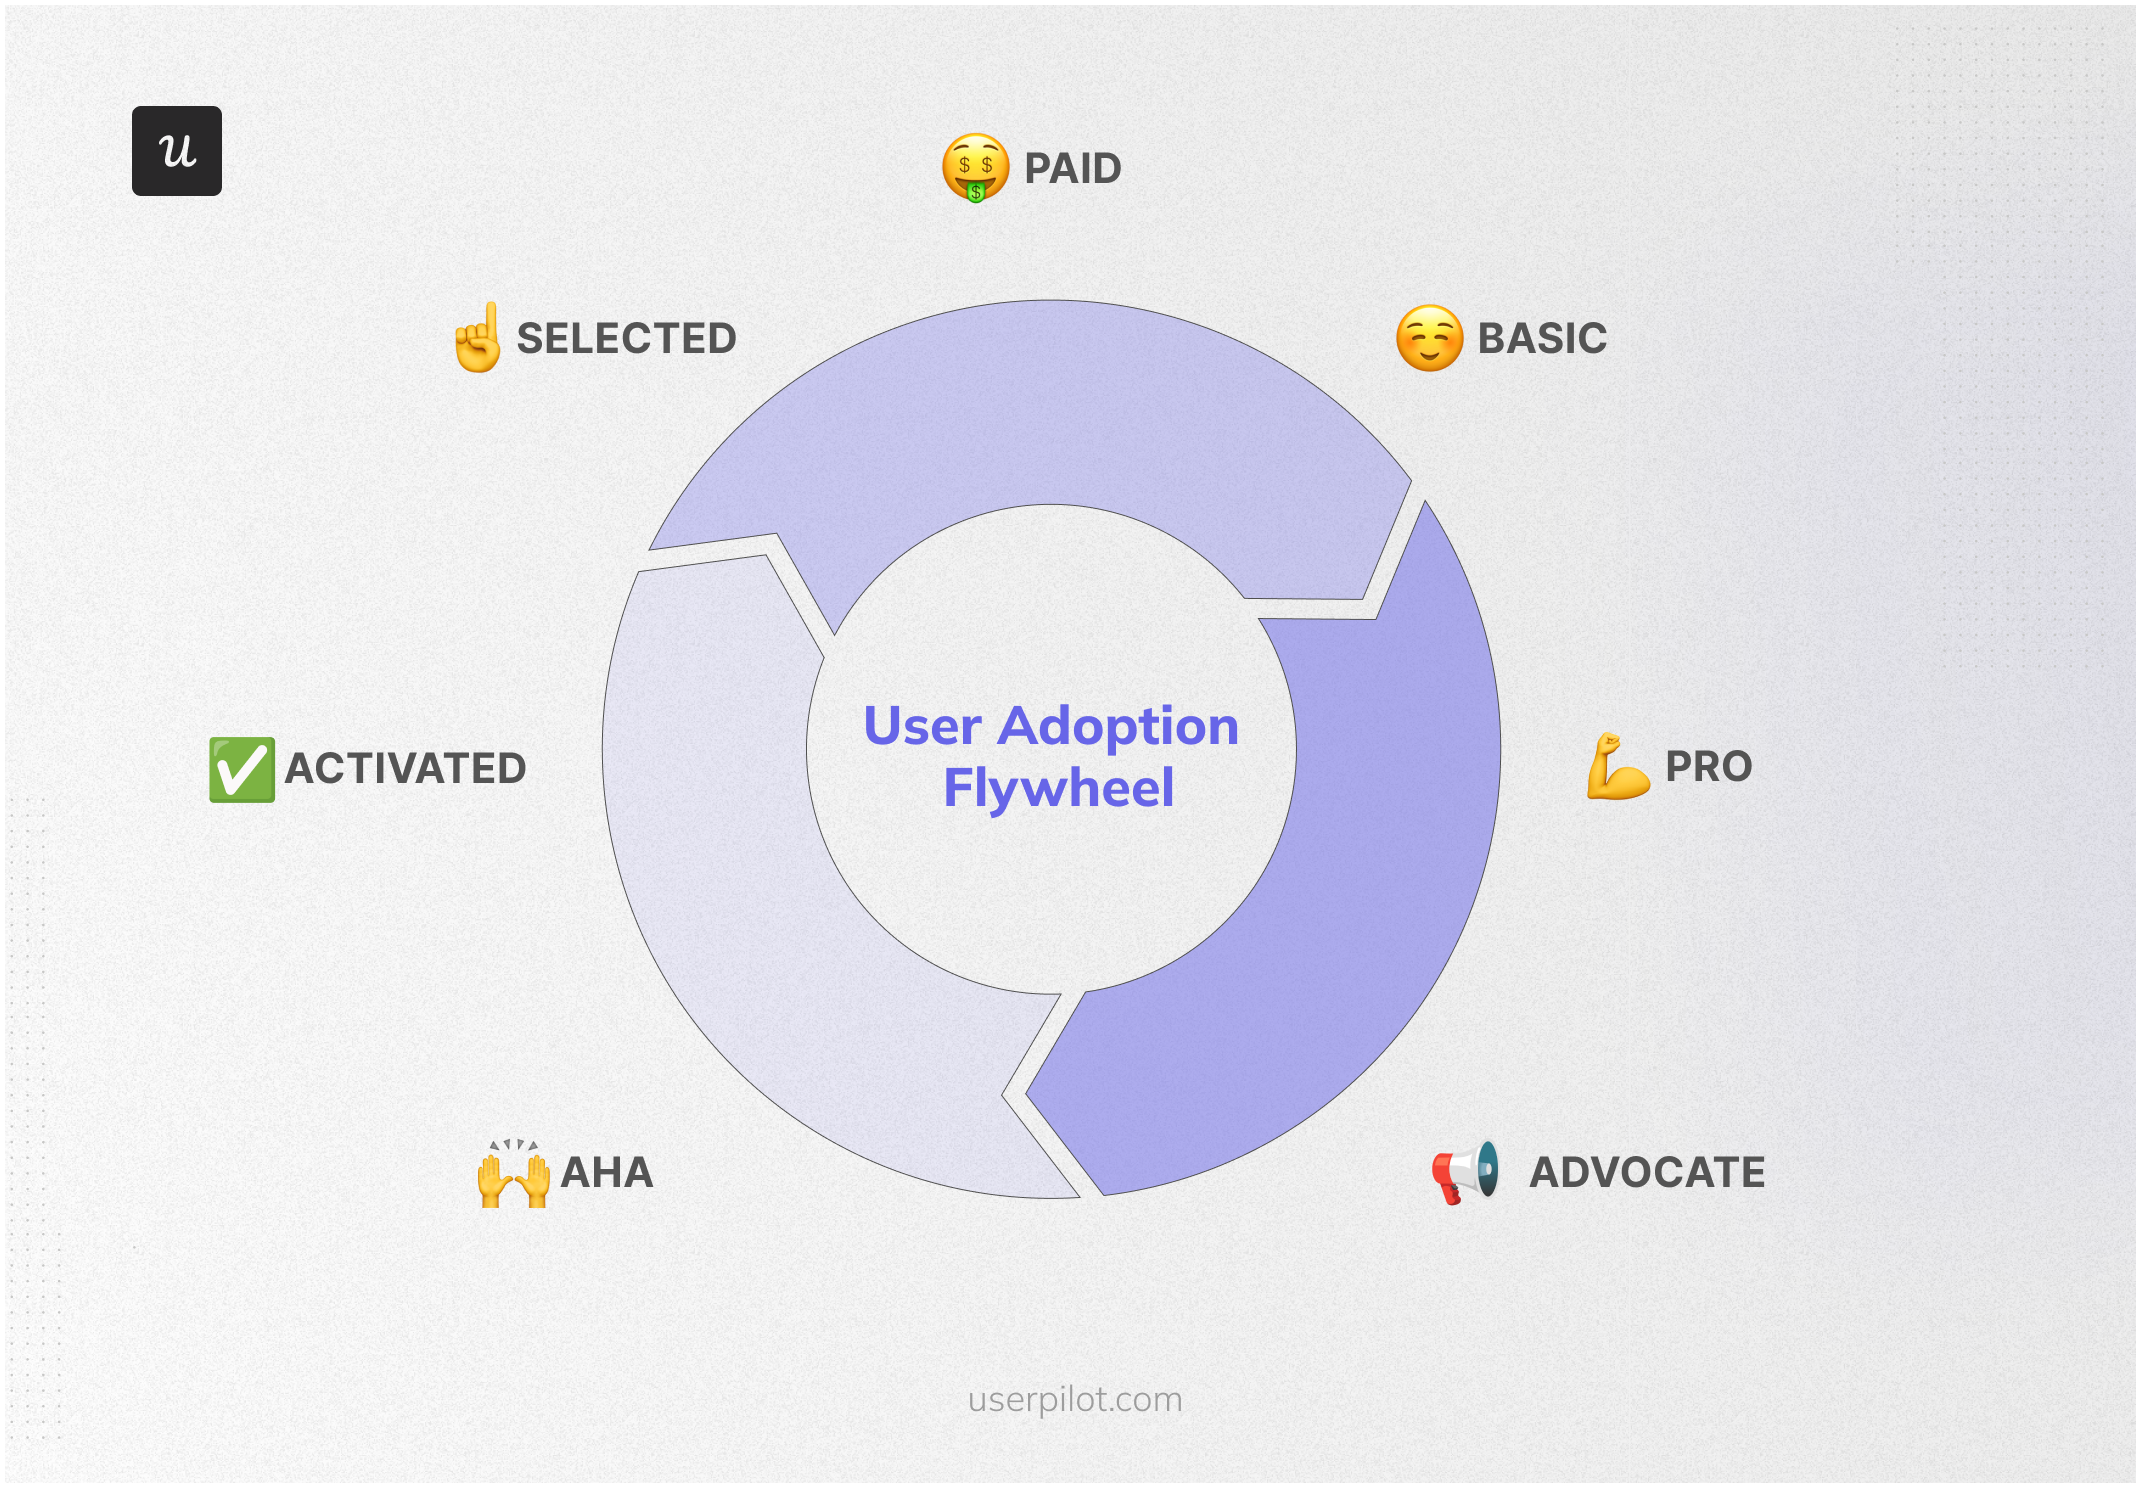 The product adoption journey helps segment users based on their level of product adoption